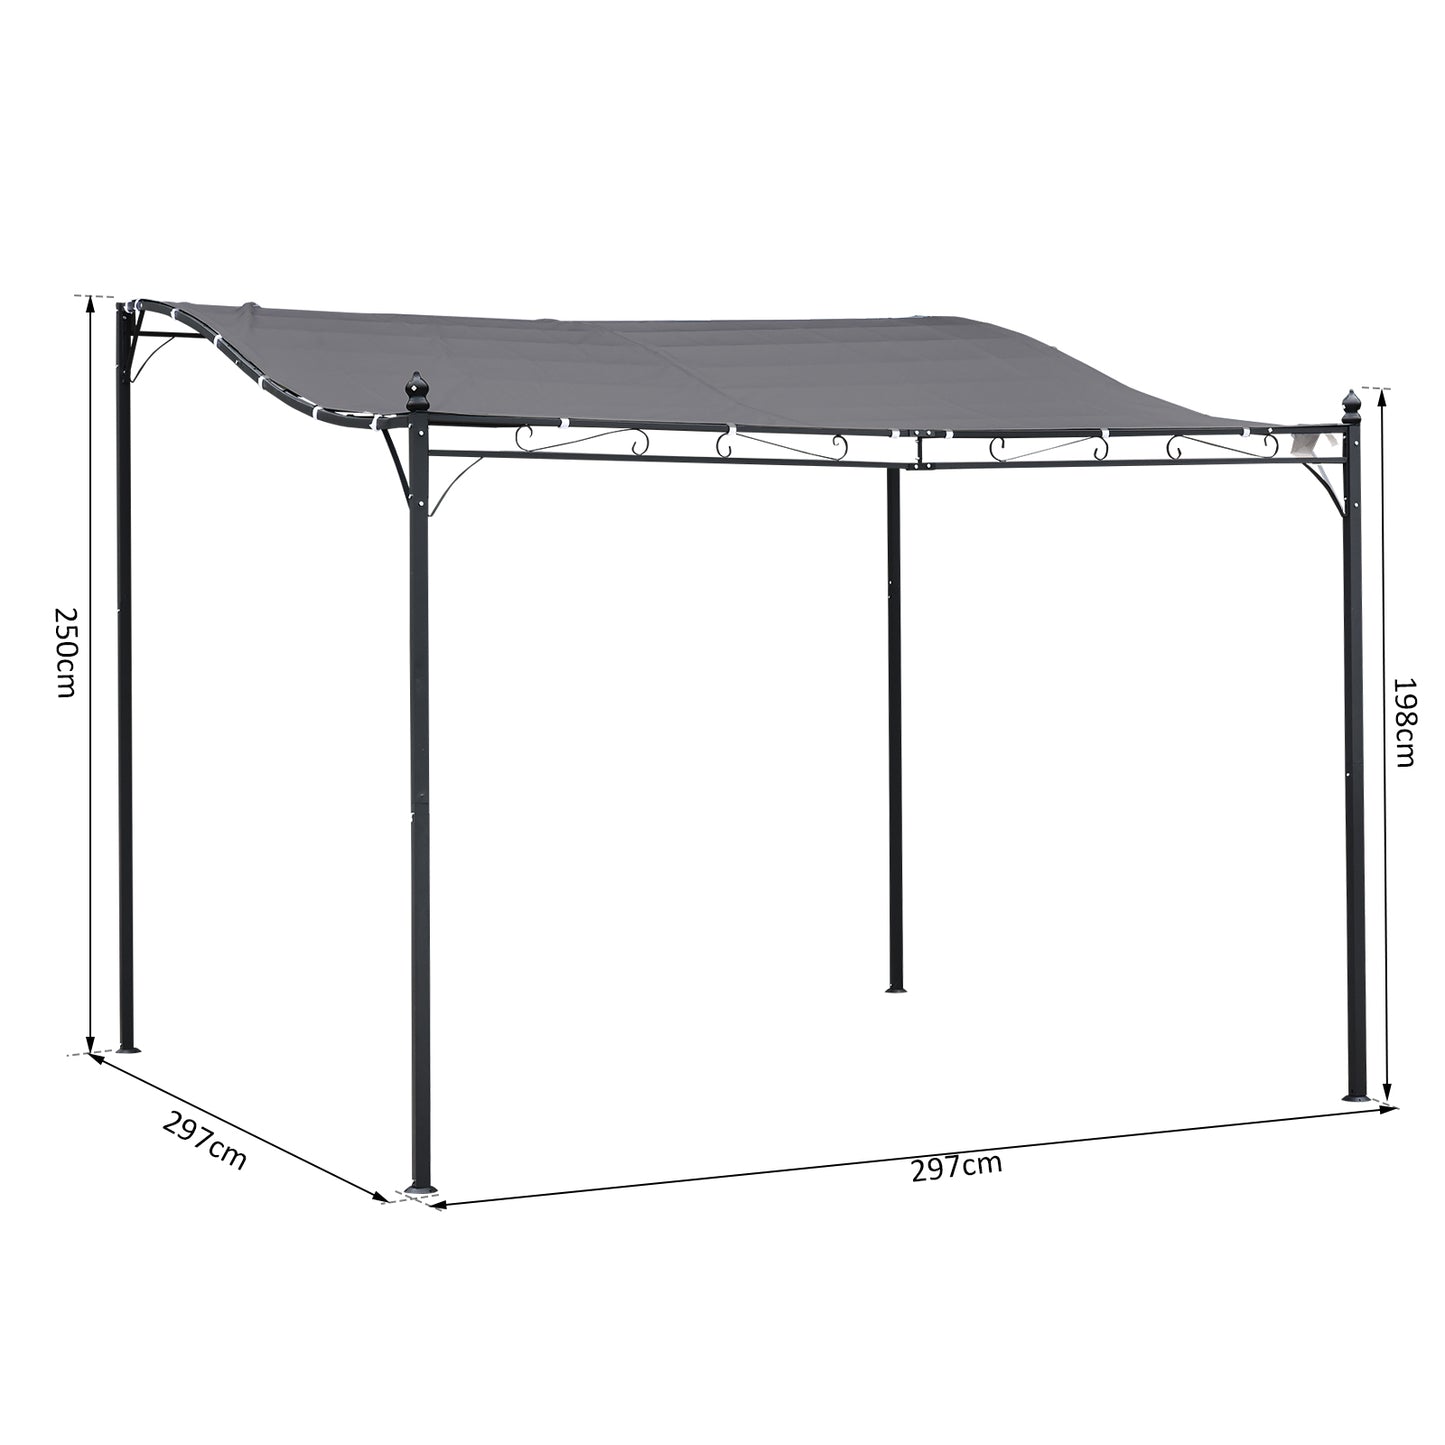 Outsunny 3x3m Freestanding Metal Wall Awning Canopy Grey